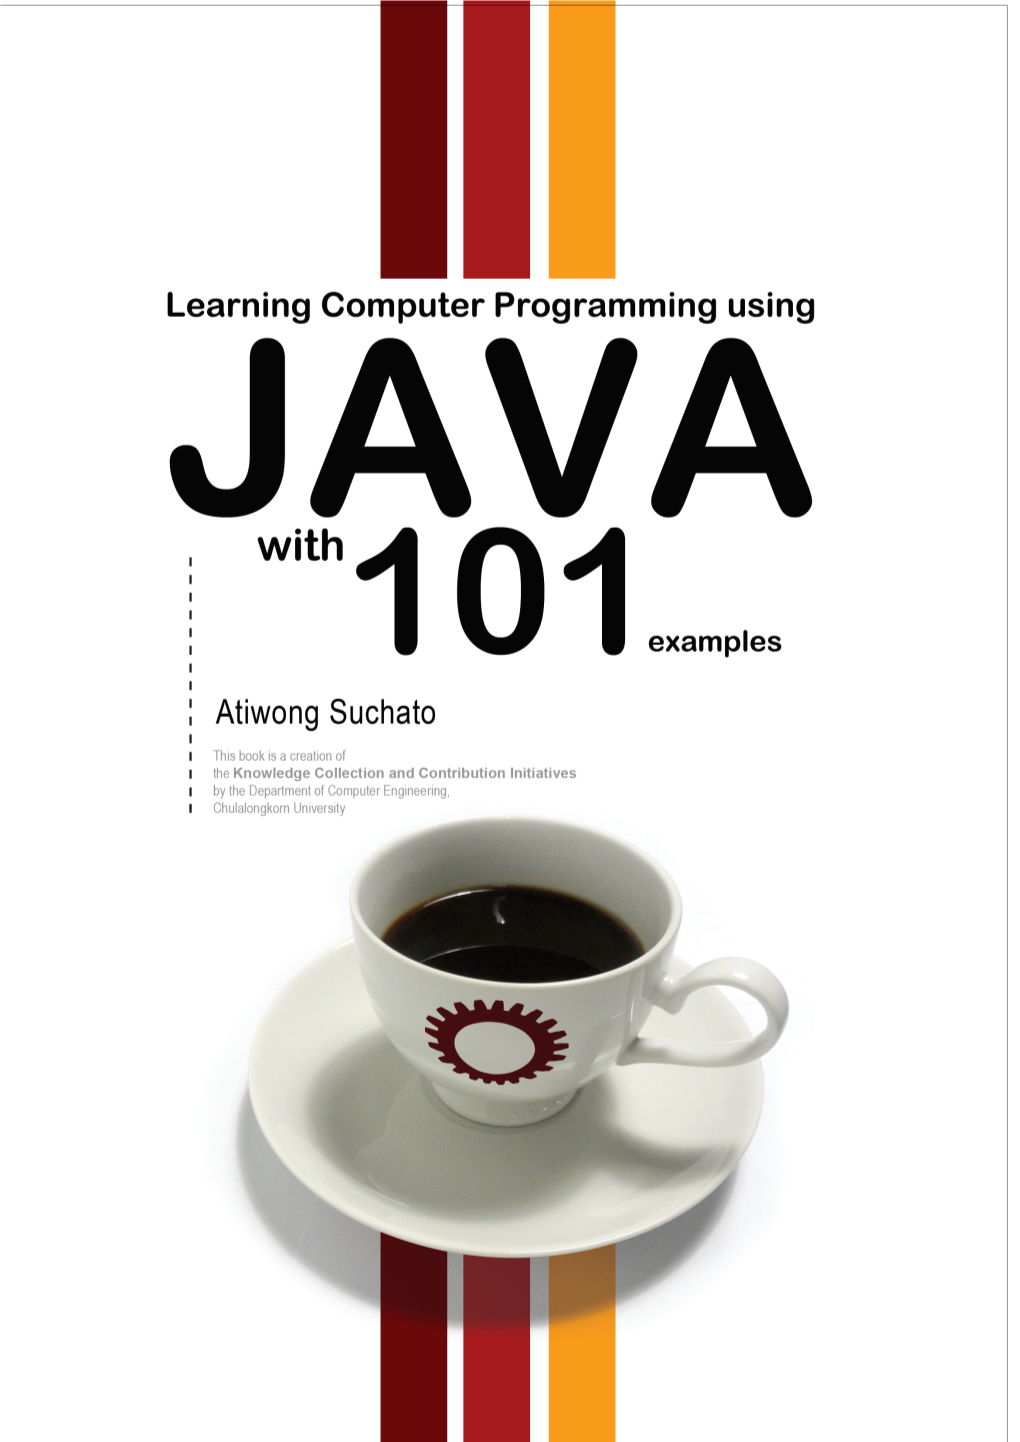 Learning Computer Programming Using JAVA with 101 Examples